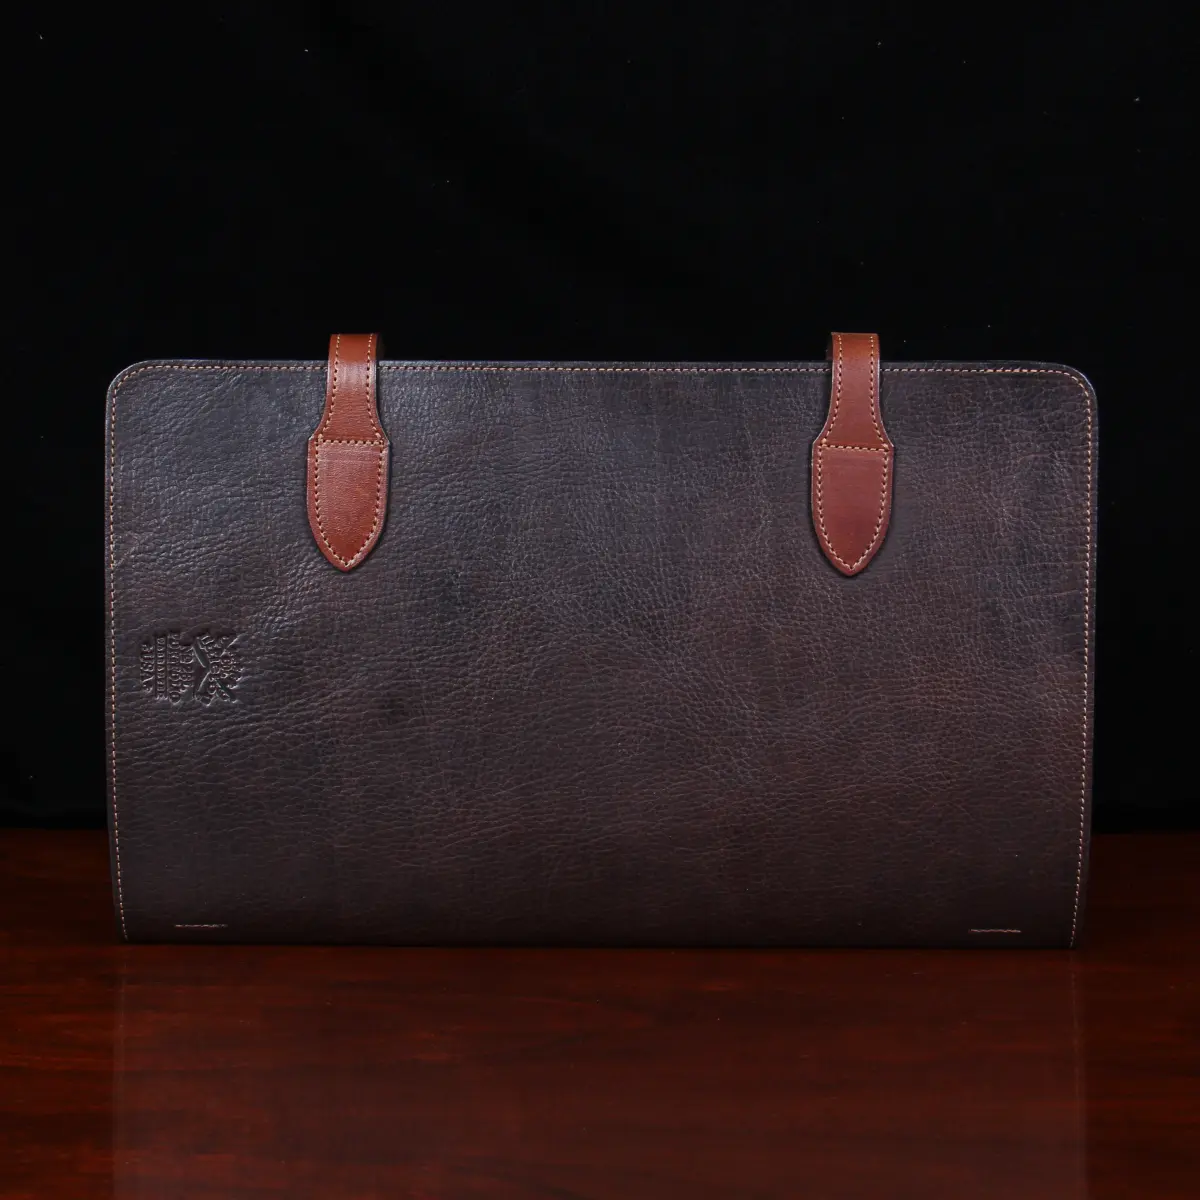 no 28 legal size leather portfolio in tobacco buffalo on a wood table - back view